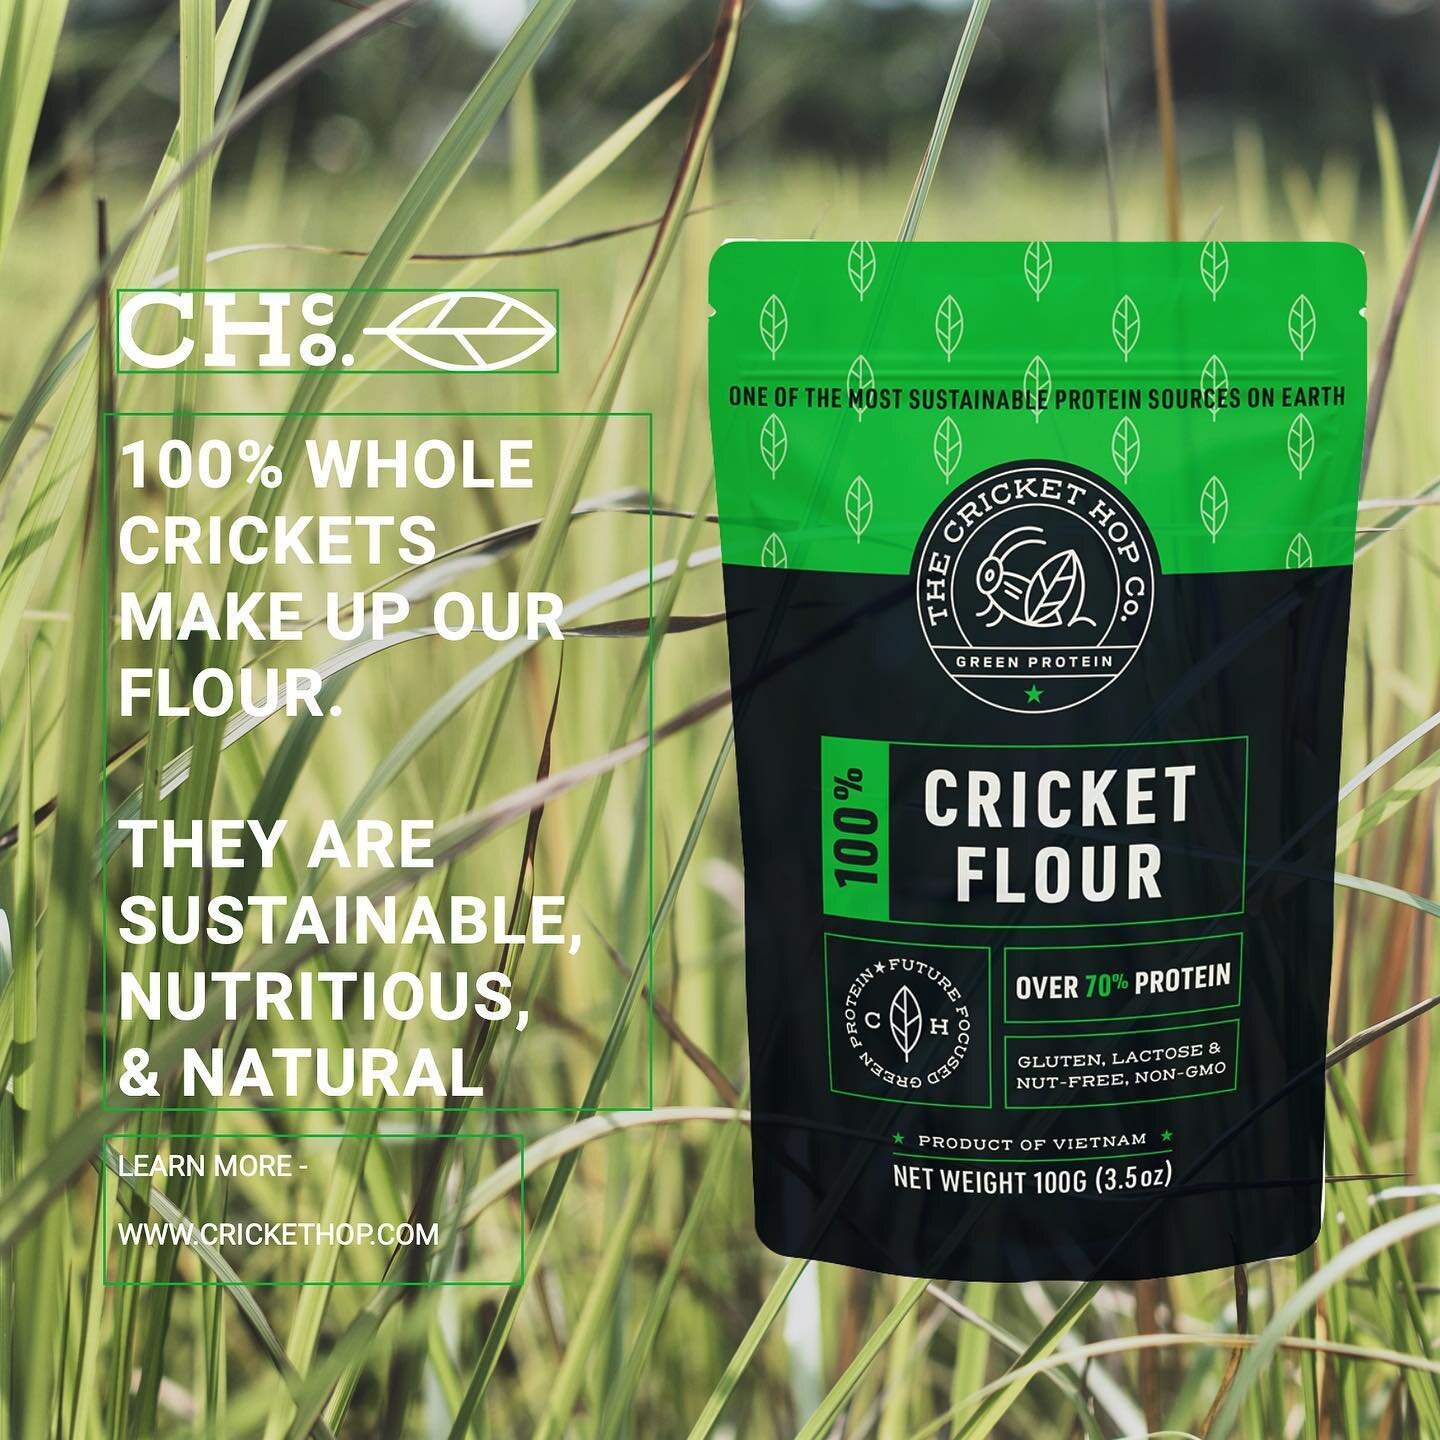 There are tons of resources on our website as well as tasty recipes to get you comfortable with insects in your diet!

www.crickethop.com

#crickethop 
#edibleinsects 
#proteinpowder 
#imunebooster 
#keto
#glutenfree 
#sustainability 
#chef
#food
#he